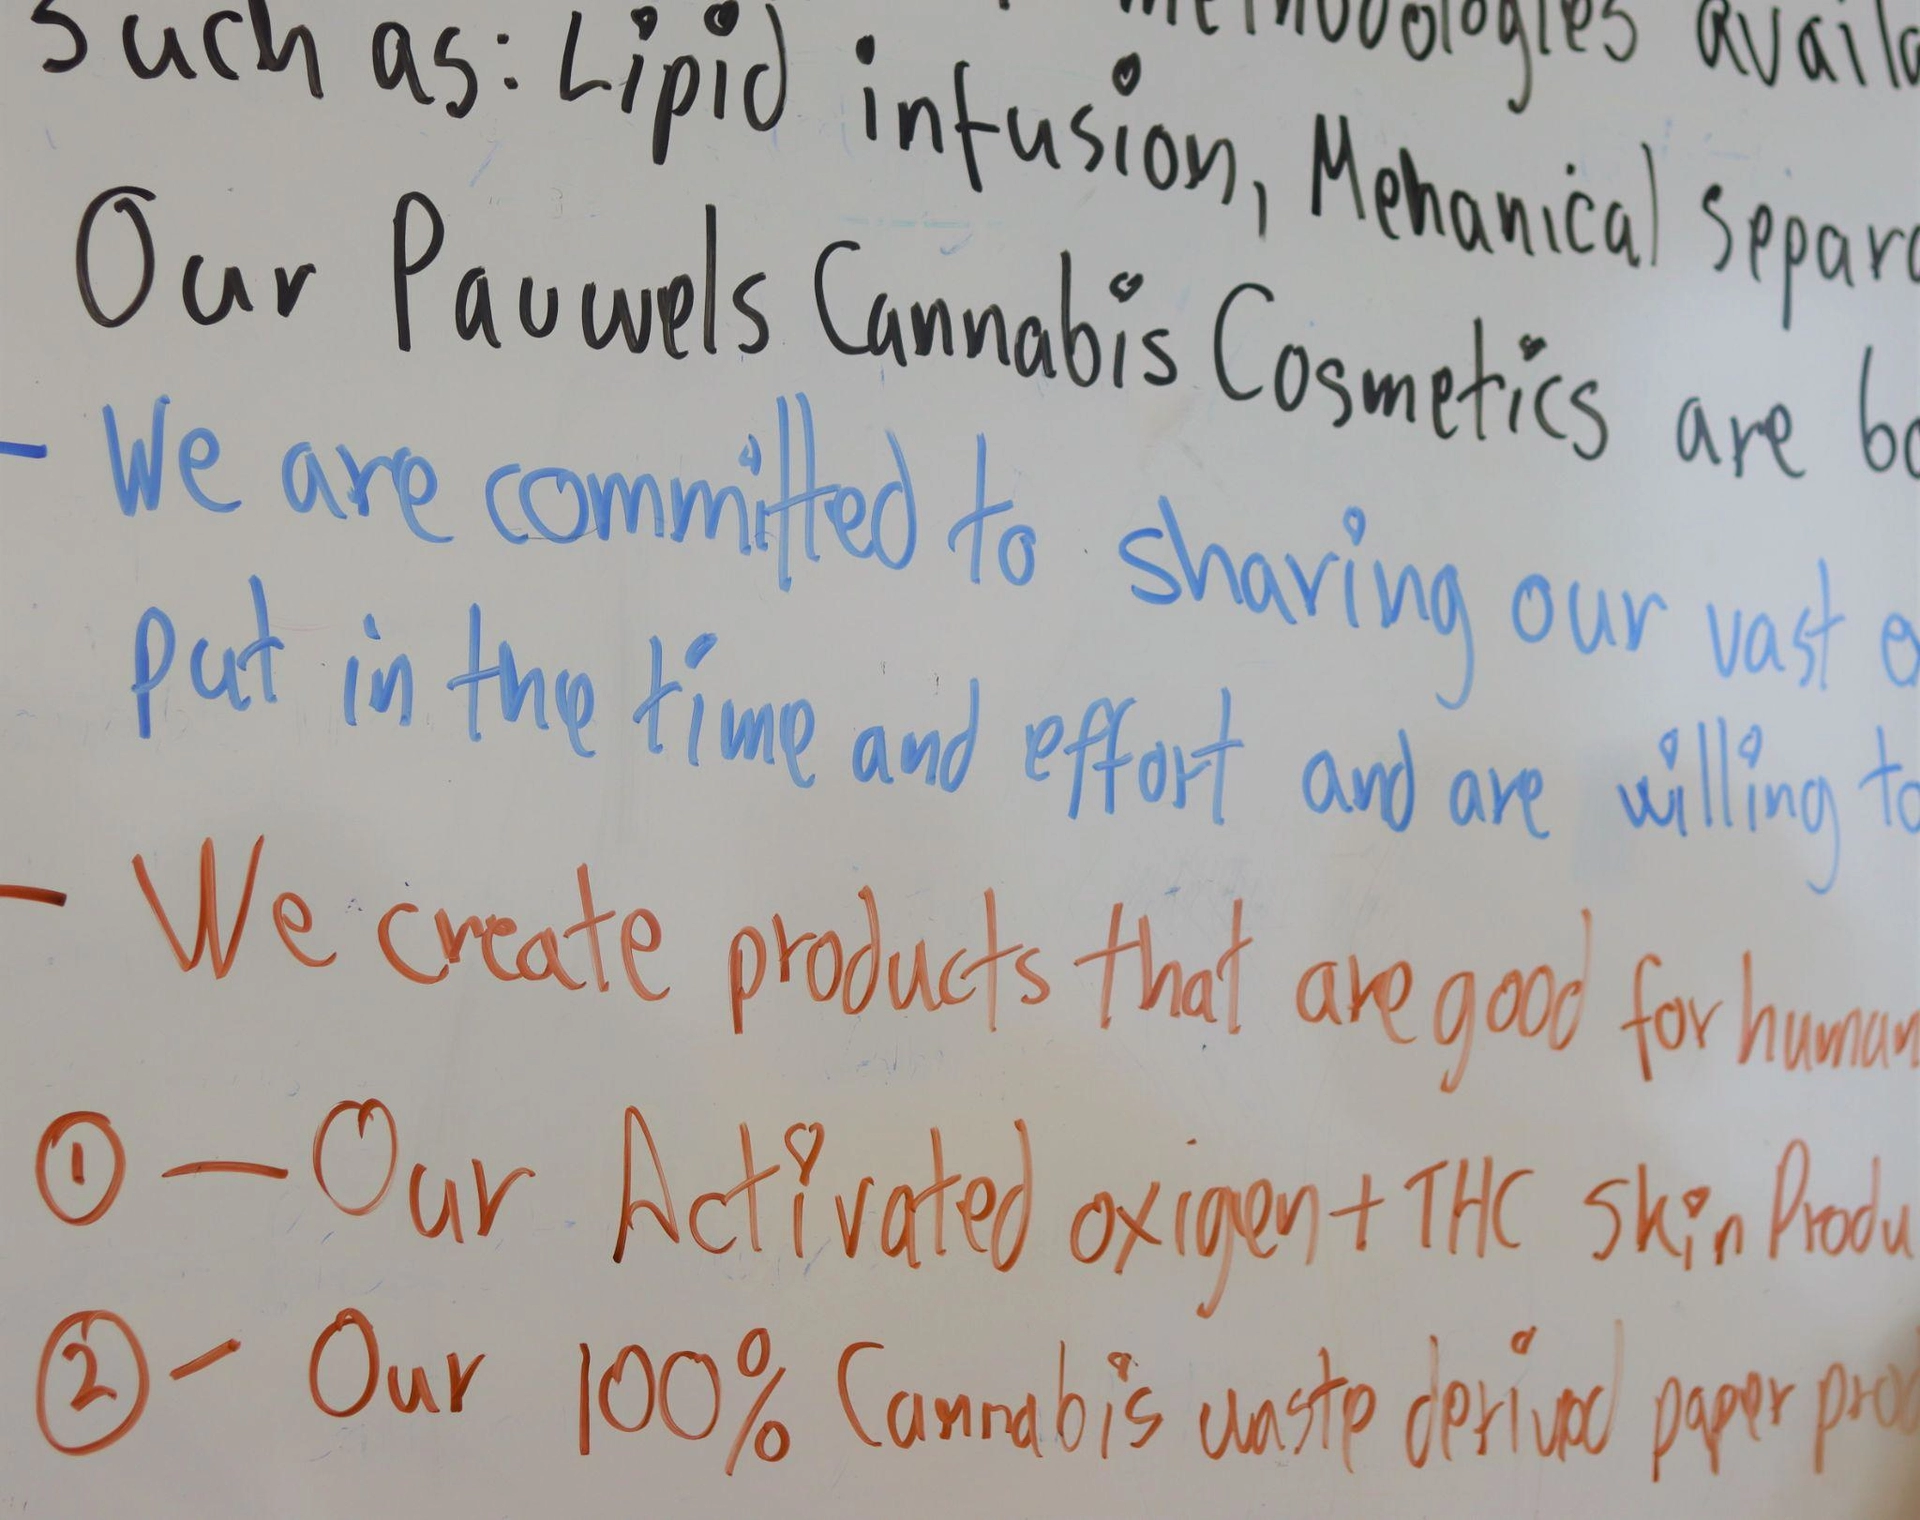 Caption The company philosophy and product attributes are proudly noted on the whiteboard at Pauwels Cannabis Cosmetics.